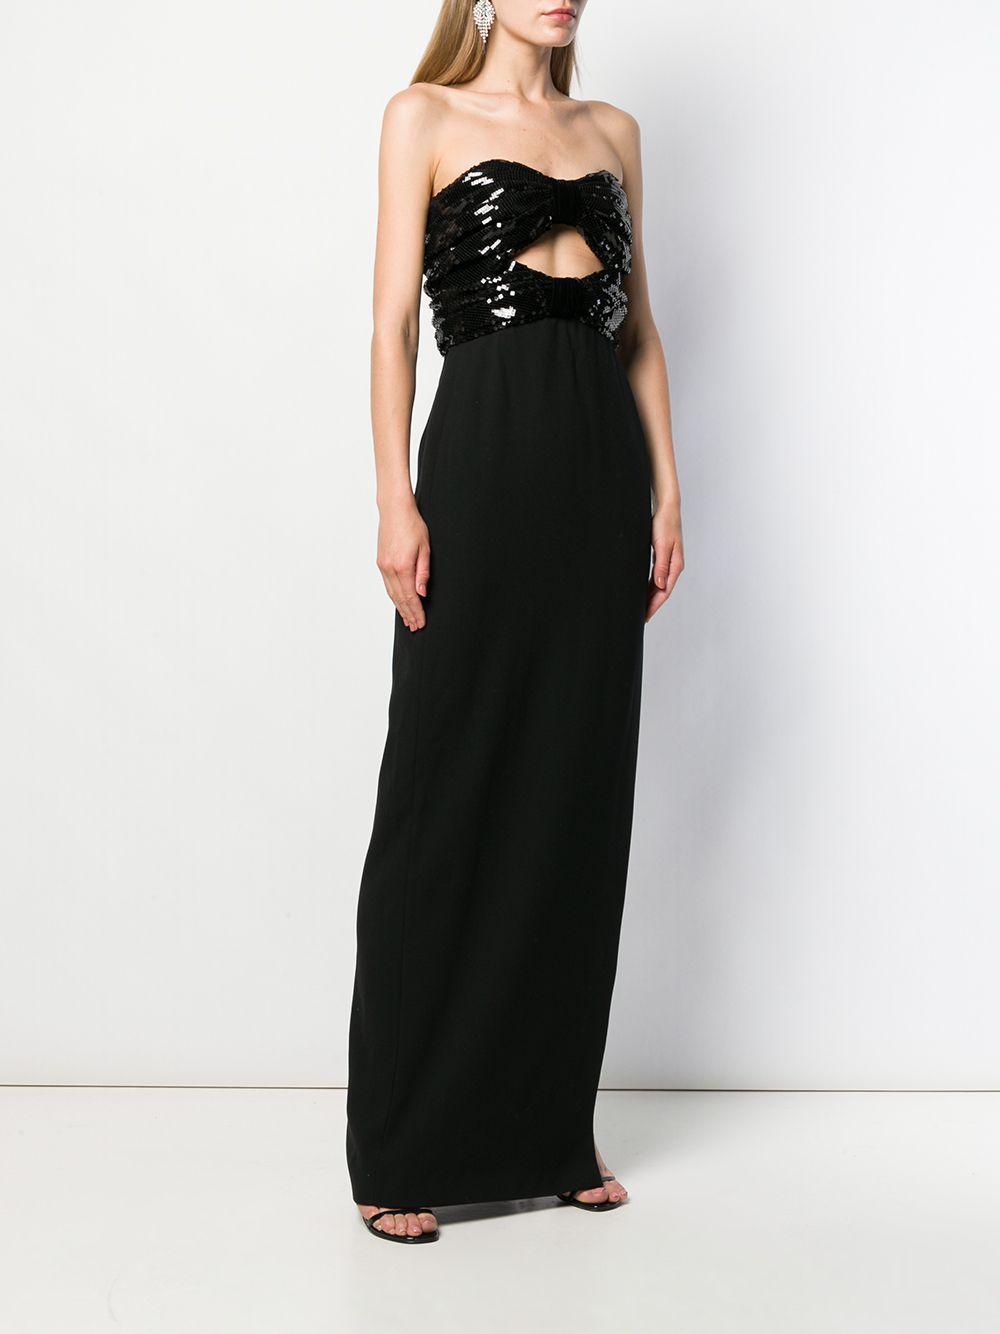 Saint Laurent Wool Sequined Evening Gown in Black - Lyst